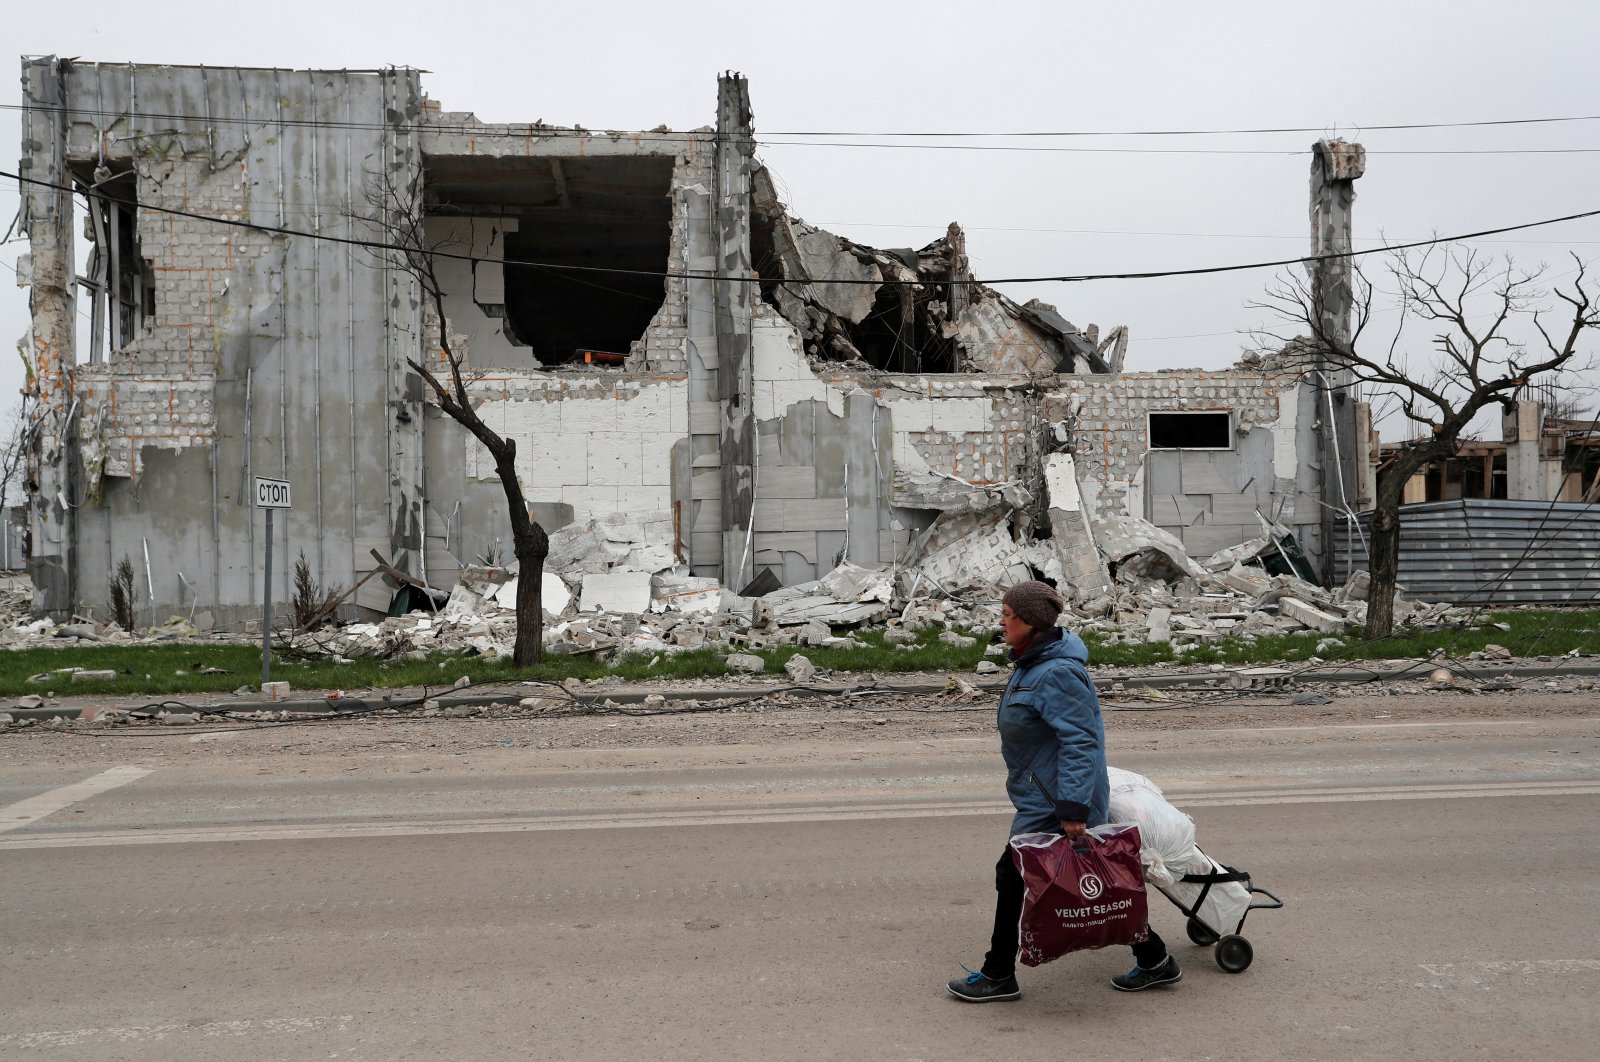 A local resident walks past a building destroyed during the Ukraine-Russia conflict in the southern port city of Mariupol, Ukraine April 19, 2022. REUTERS/Alexander Ermochenko/File Photo